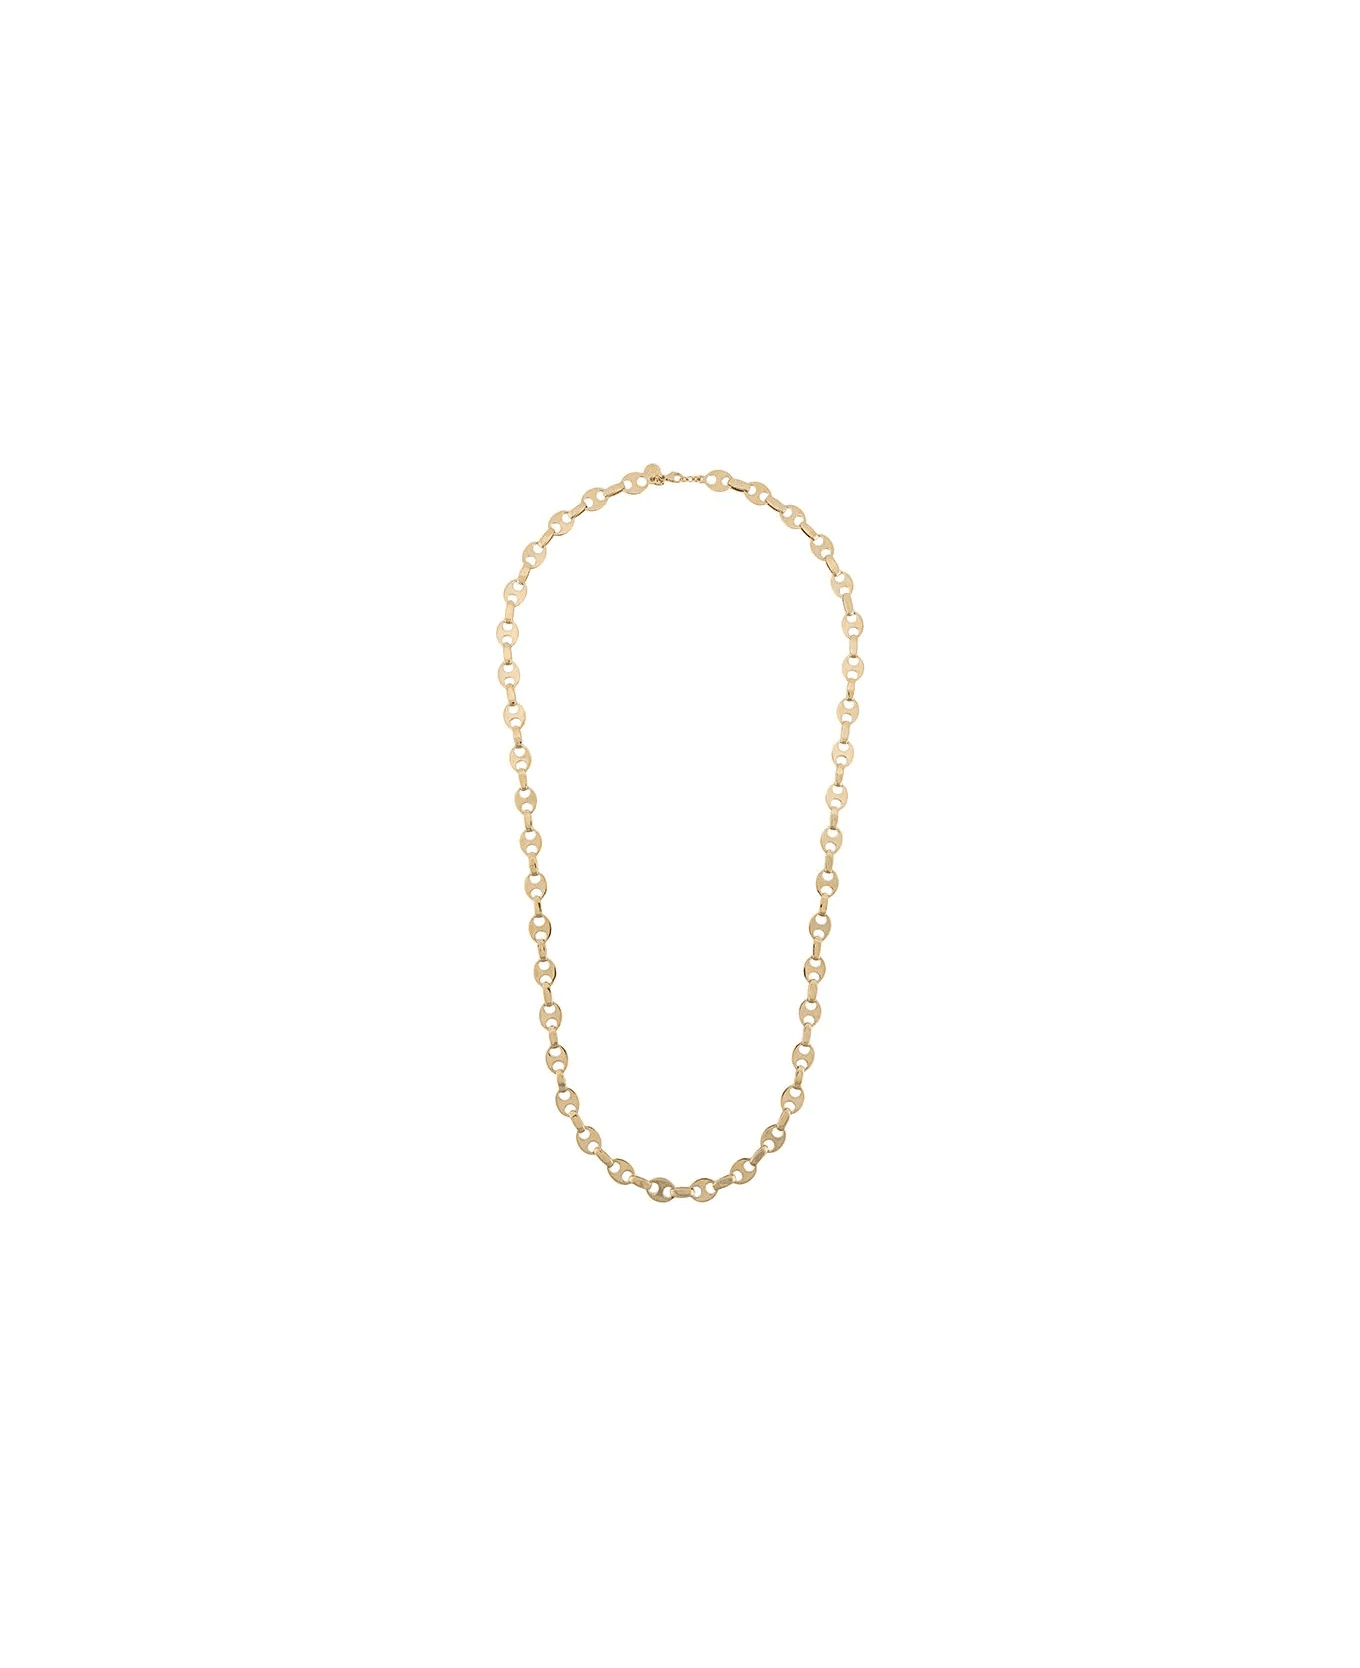 Paco Rabanne Eight Nano Gold Plated Necklace - Gold